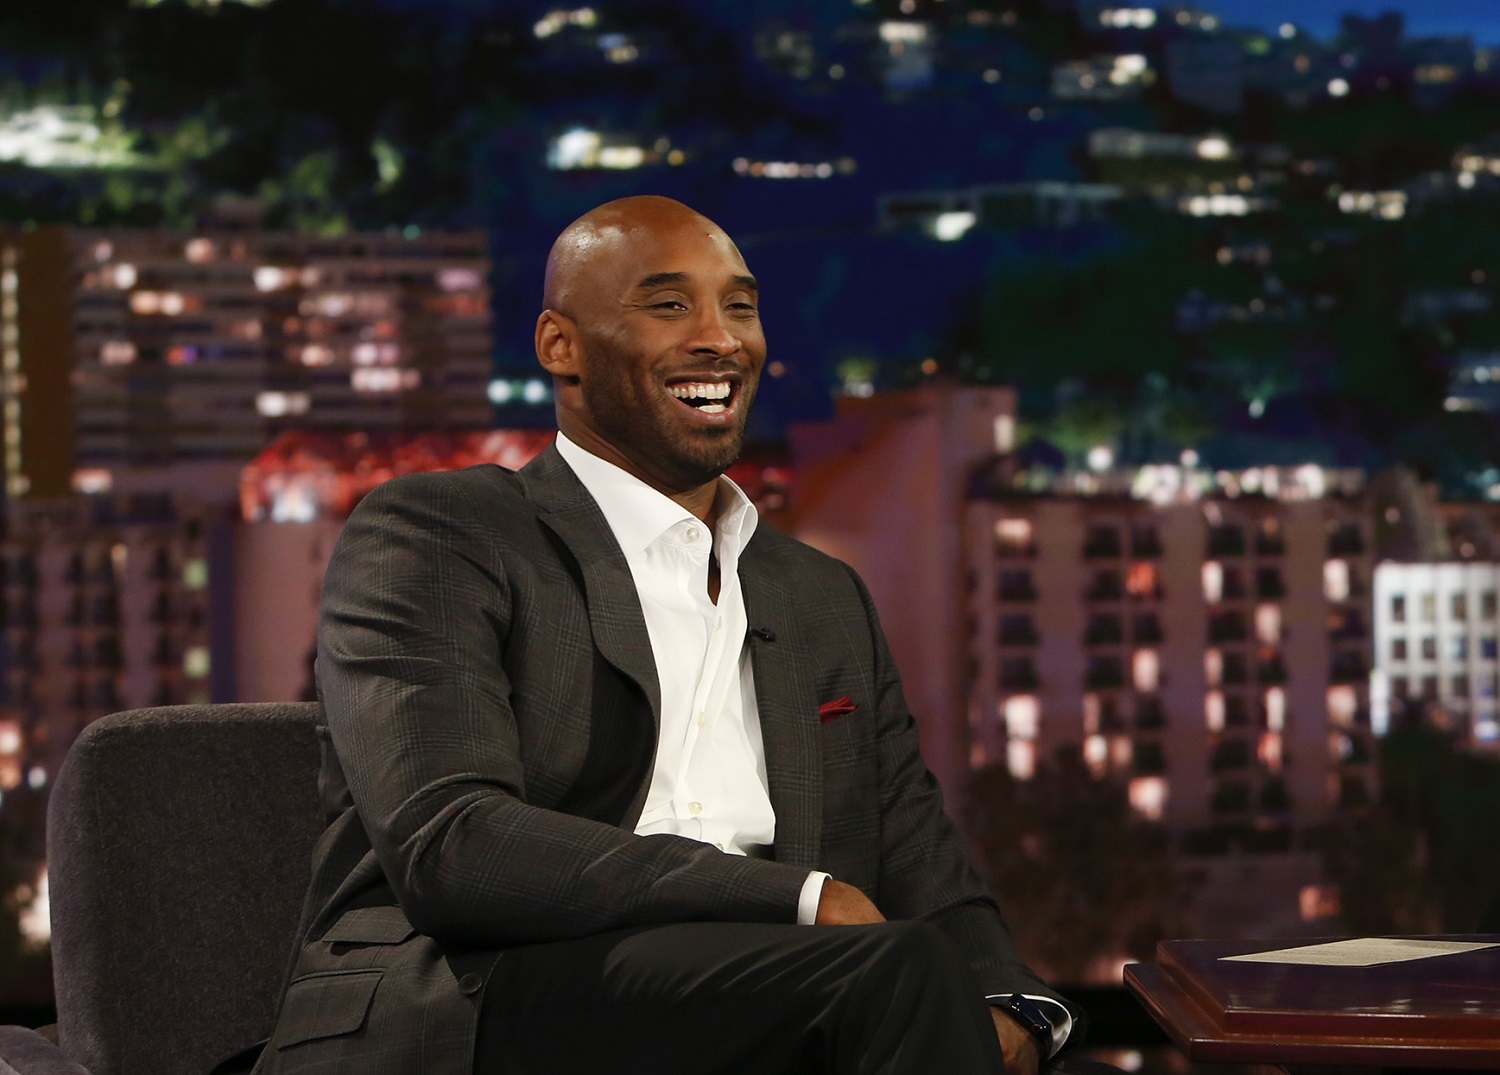 The wrongful death suit filed following Kobe Bryant's death in January 2020 continues to wind its way through the courts. | ABC/Randy Holmes via Getty Images